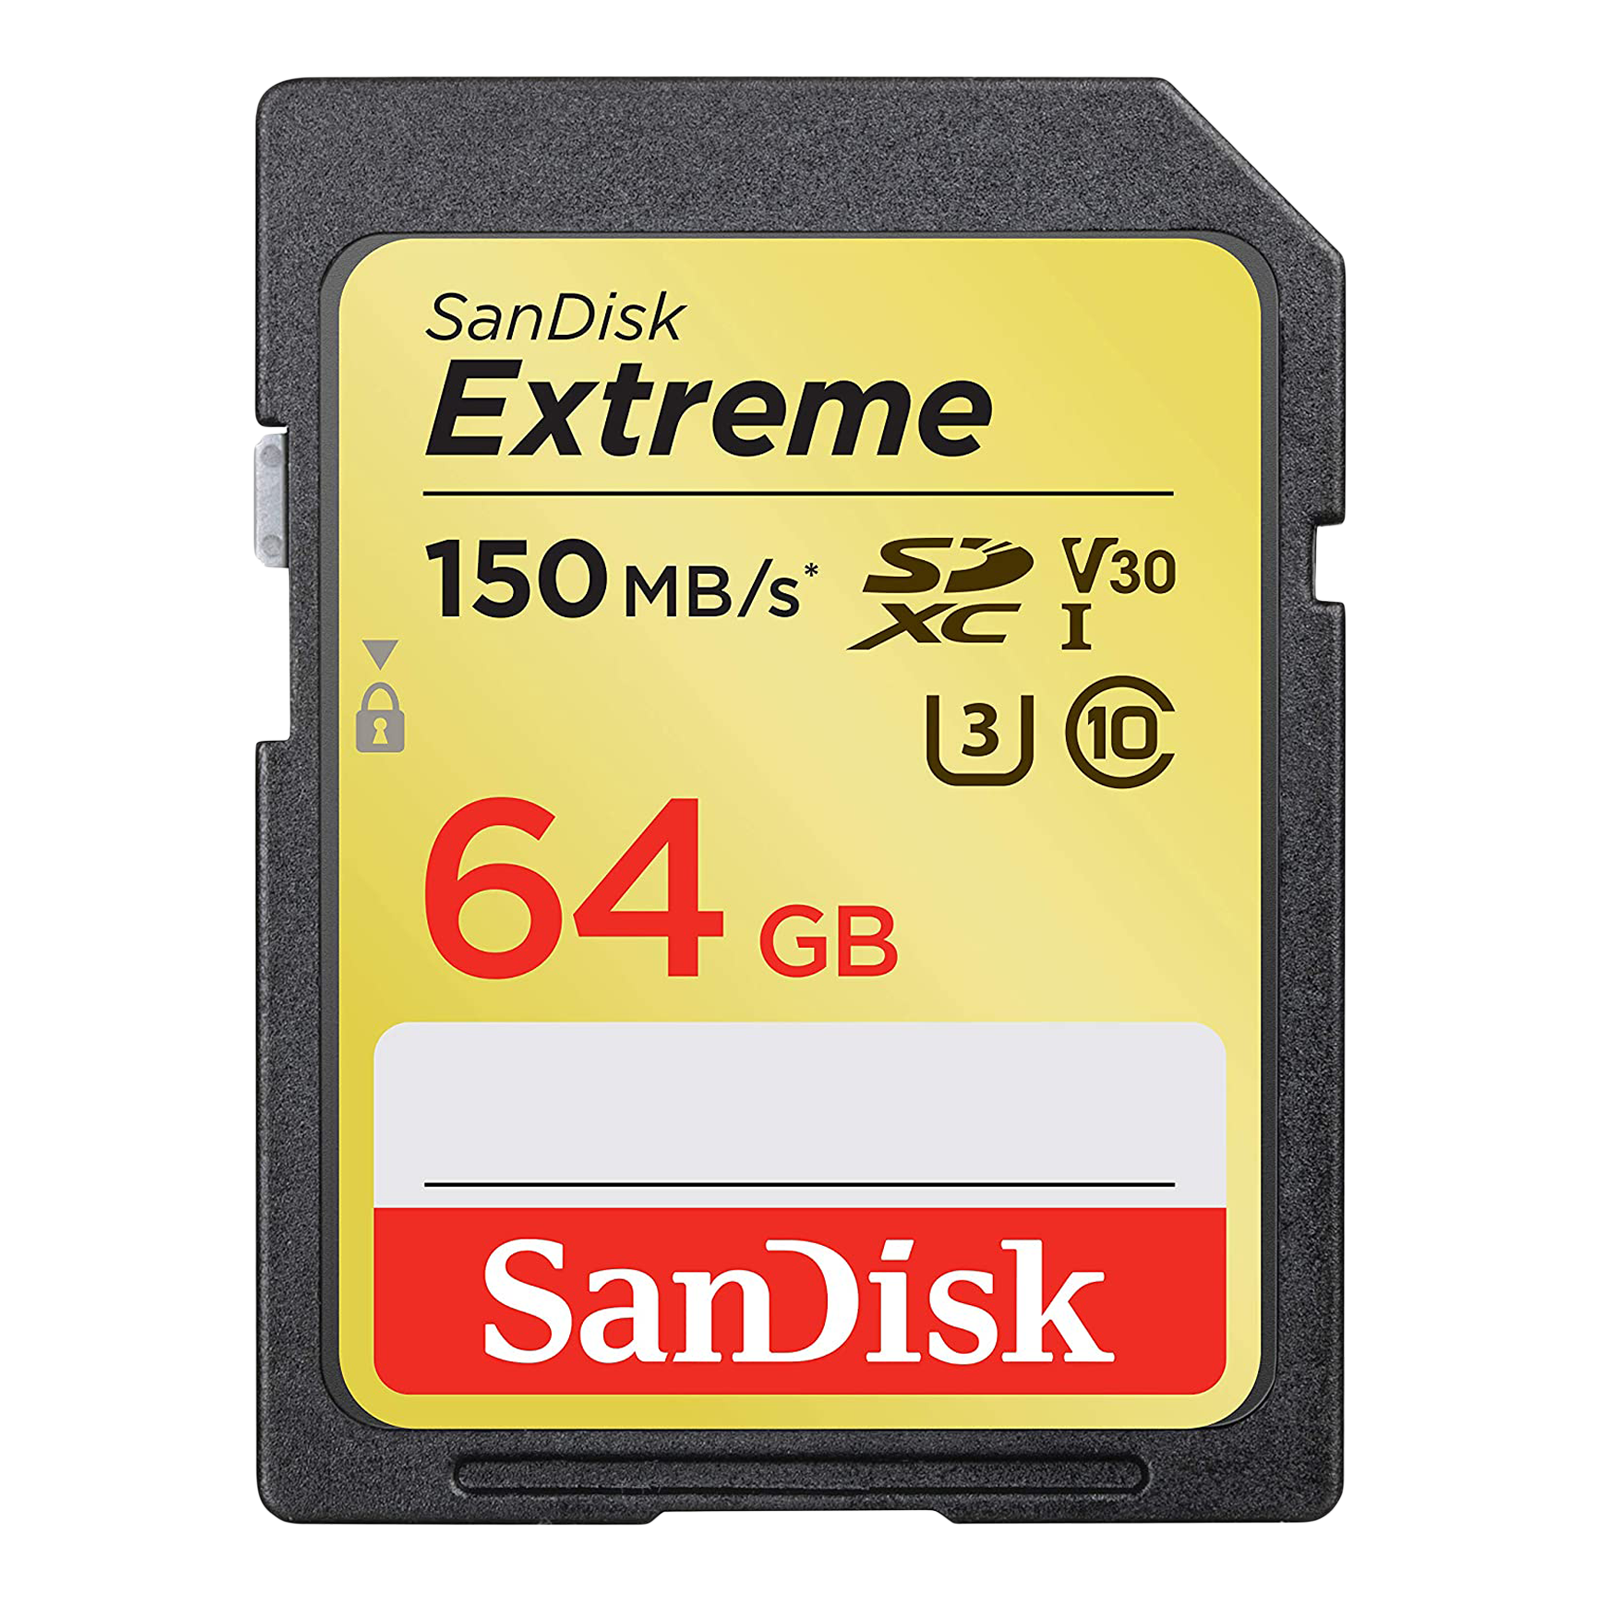 SanDisk Extreme SDXC 64GB Class 10 150MB/s Memory Card